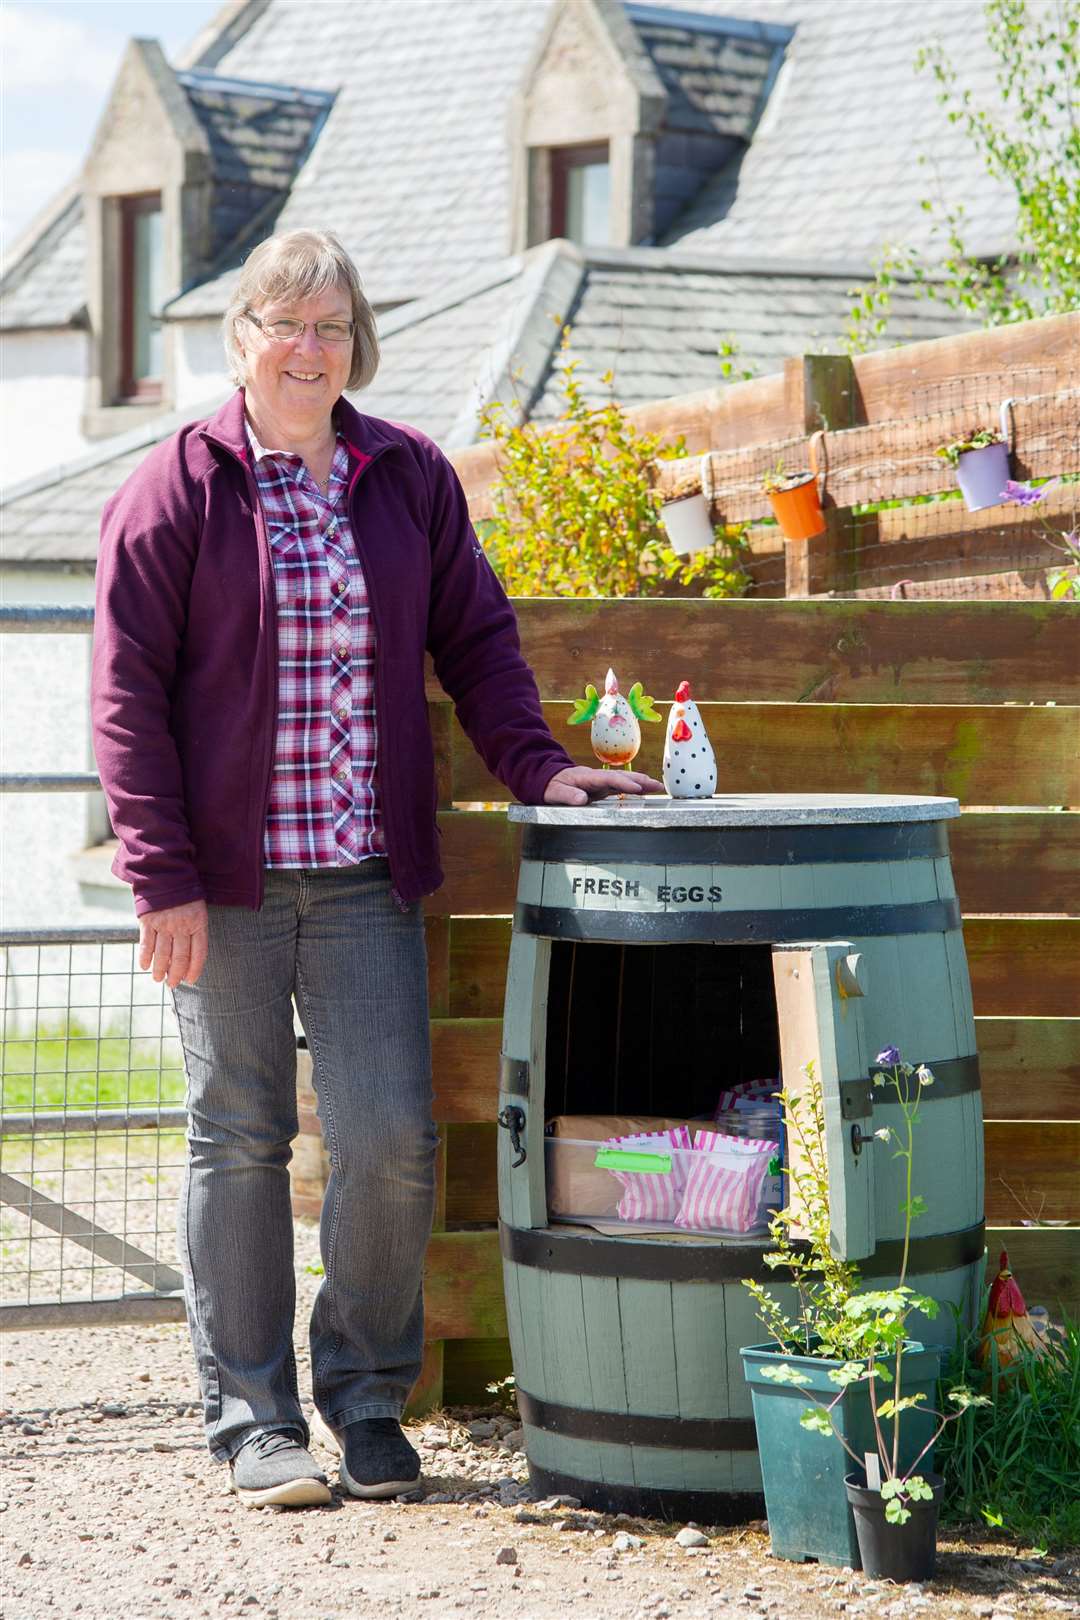 Jackie is selling produce including jam, cakes and tablet from a barrel at the end of her garden.